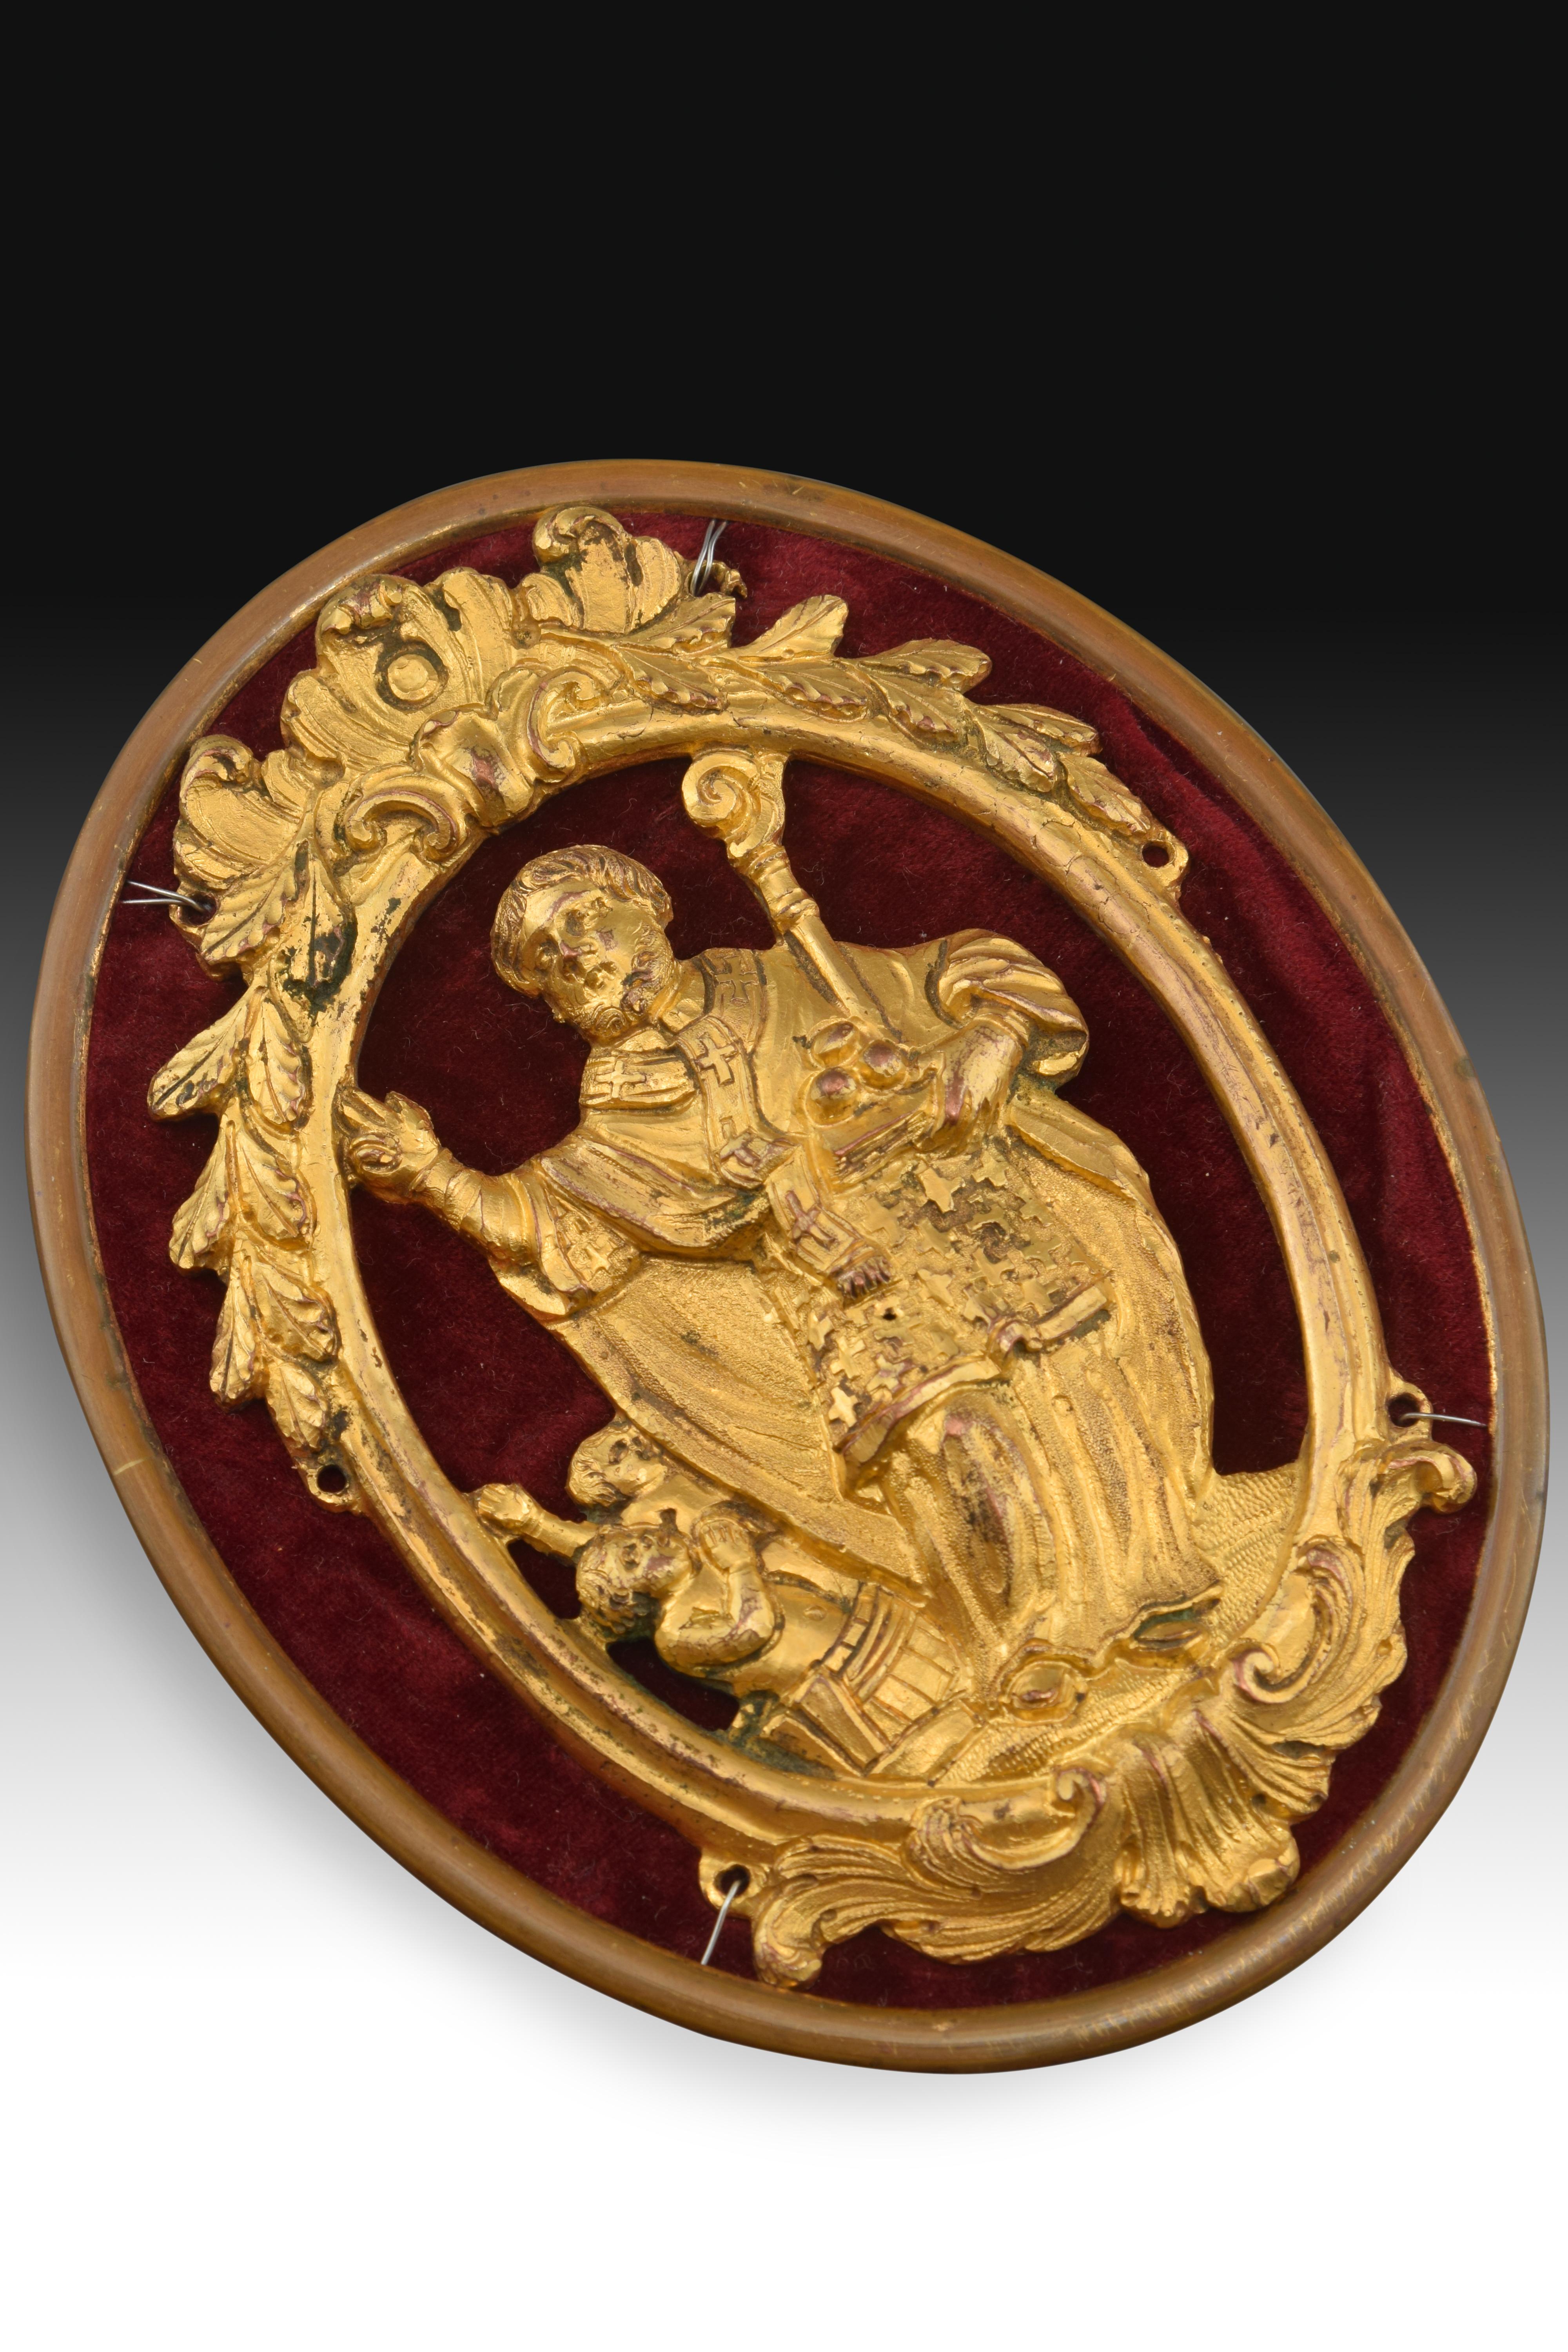 Saint Nicholas devotional medal on support. Gilded bronze, textile, metal, 18th century.
Golden bronze devotional medal placed on a support by wires that has an oval frame enhanced with a top with vegetal elements in symmetrical composition and